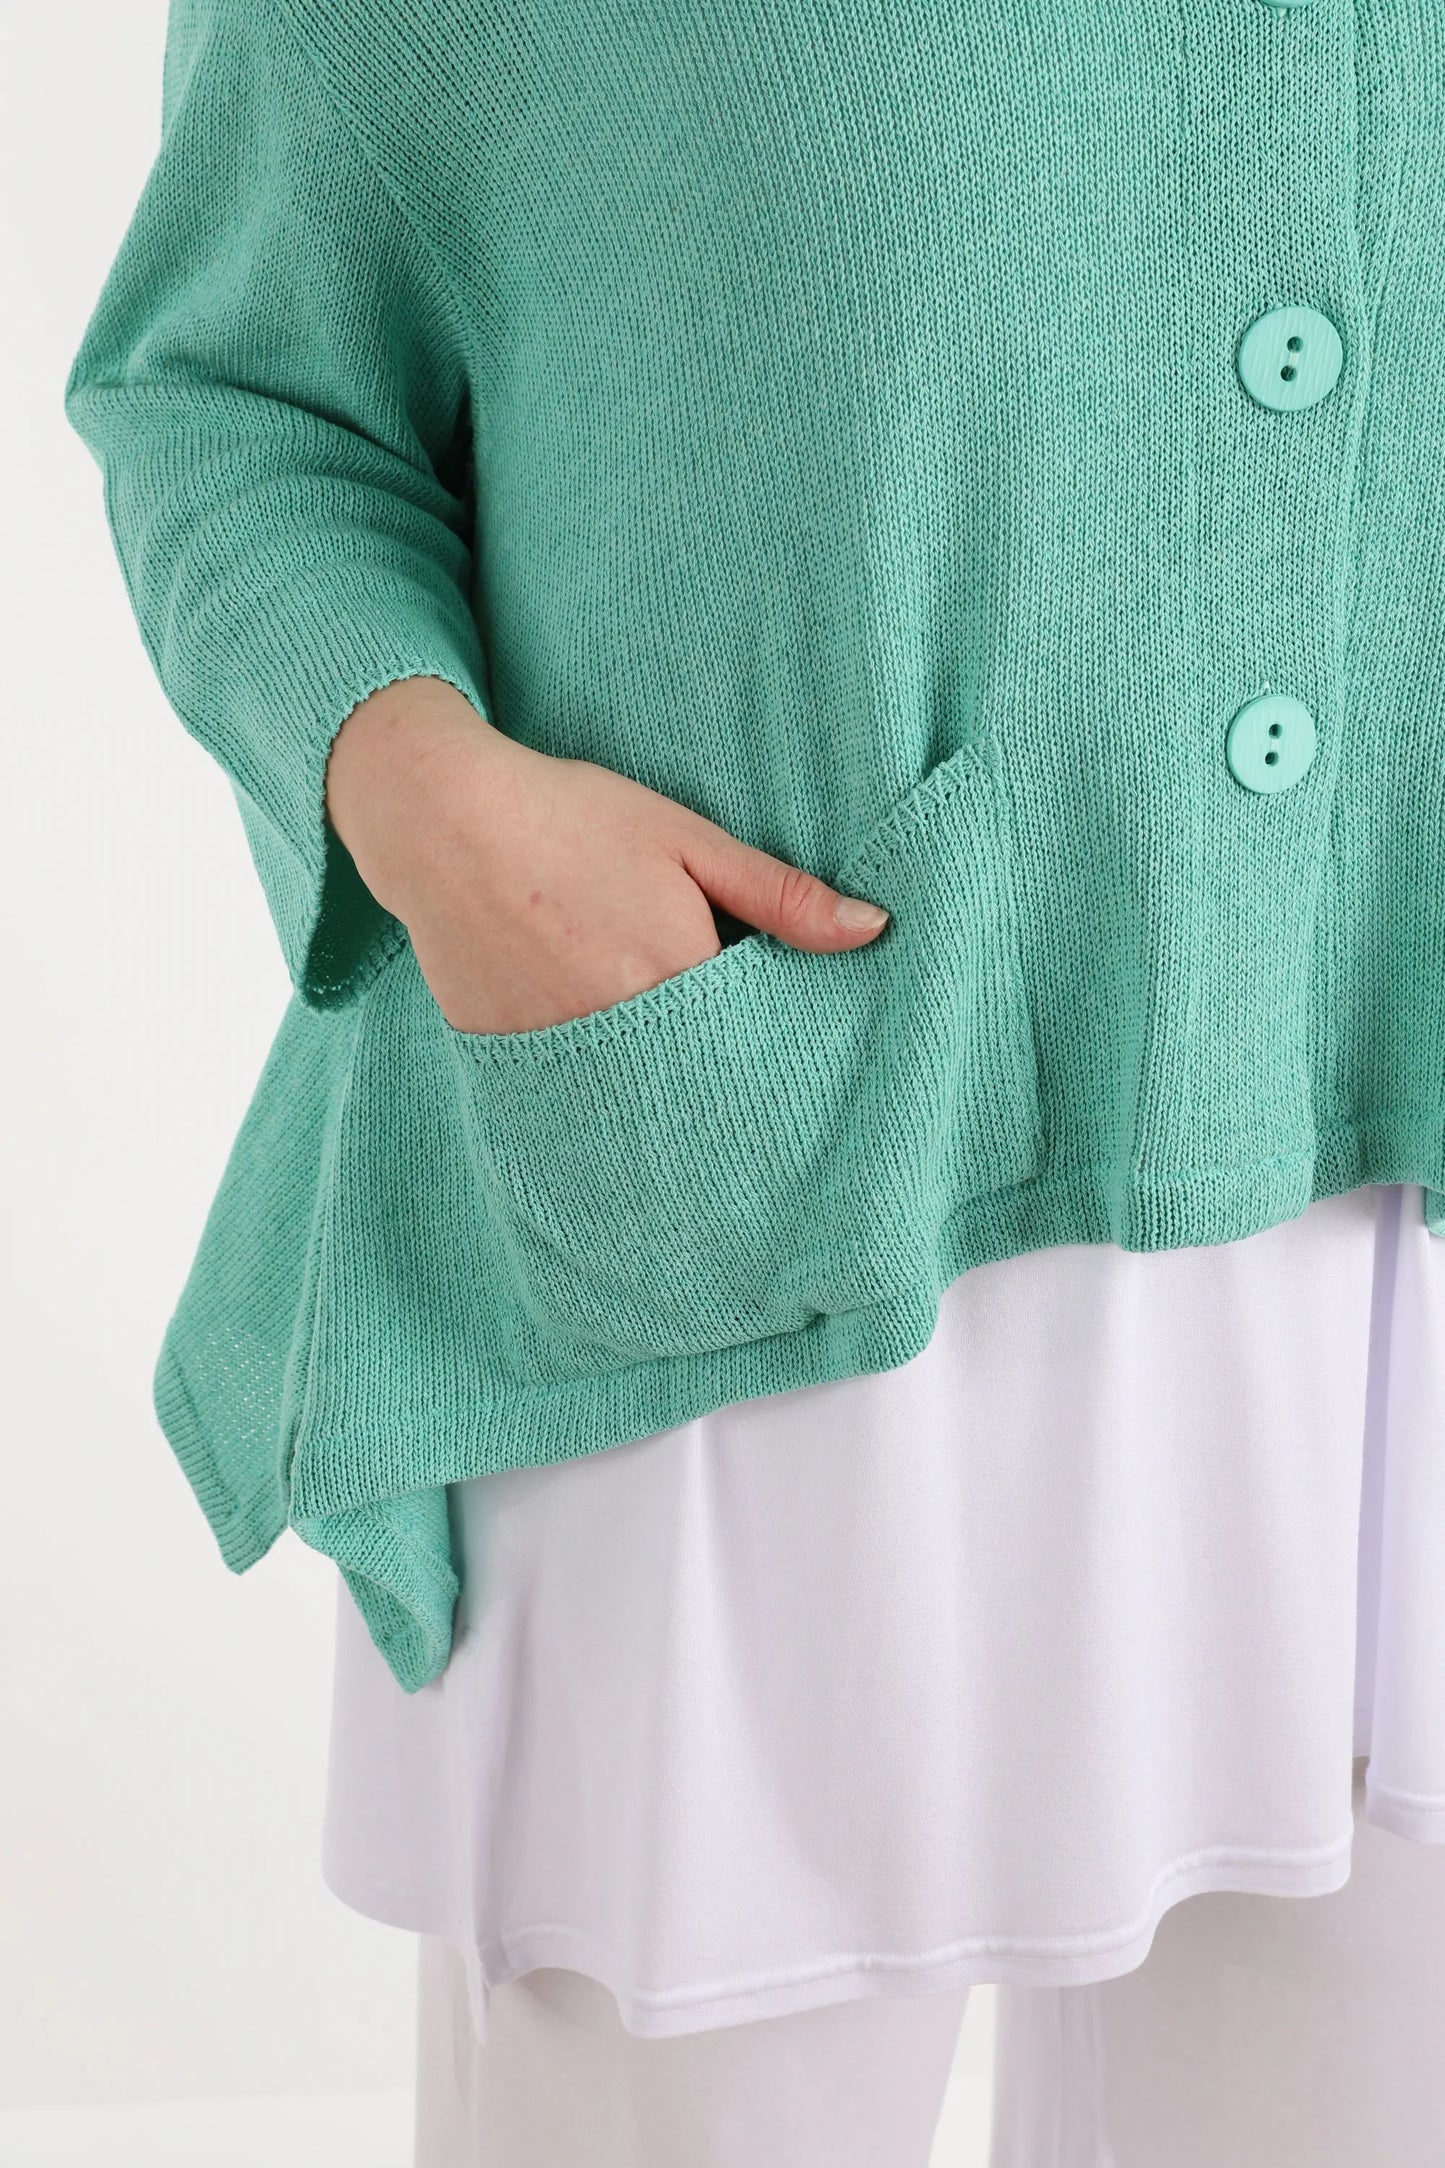 Summer jacket in A-shape made of light knit quality, knit in mint